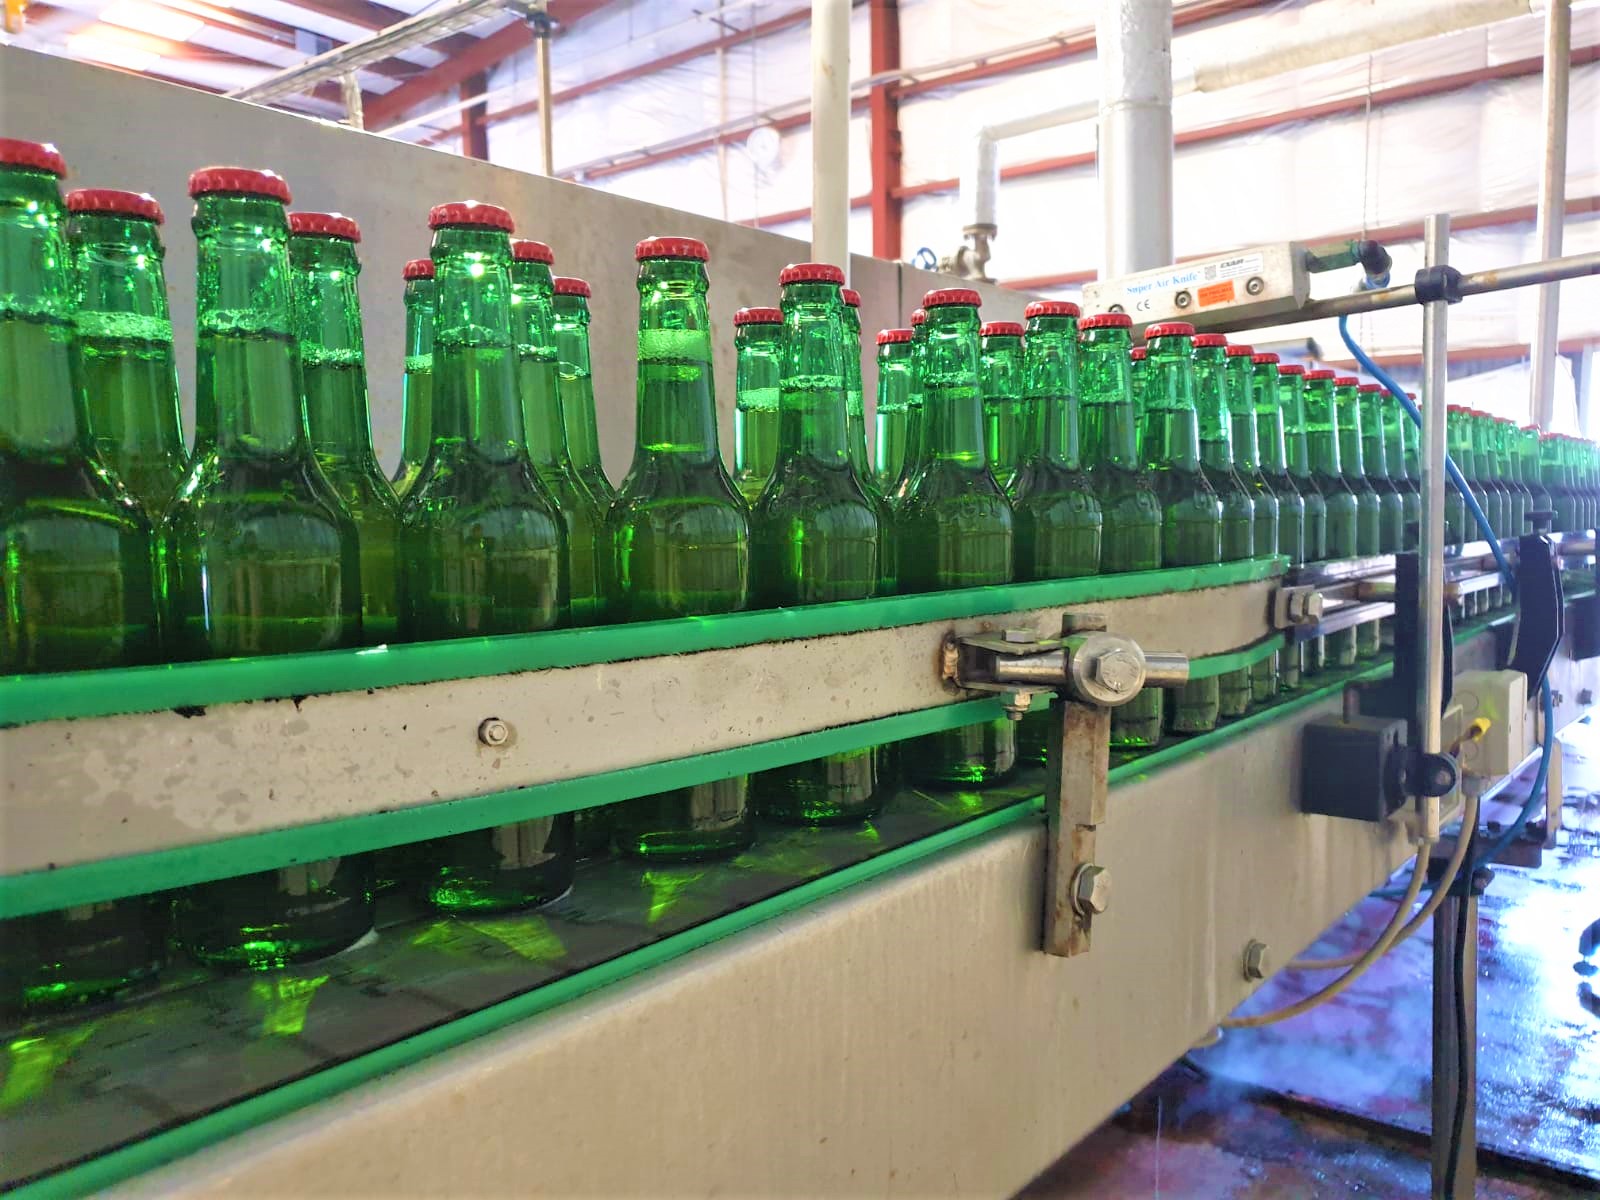 Pasteurization Of Beer - The Use Of Non-Thermal Technologies